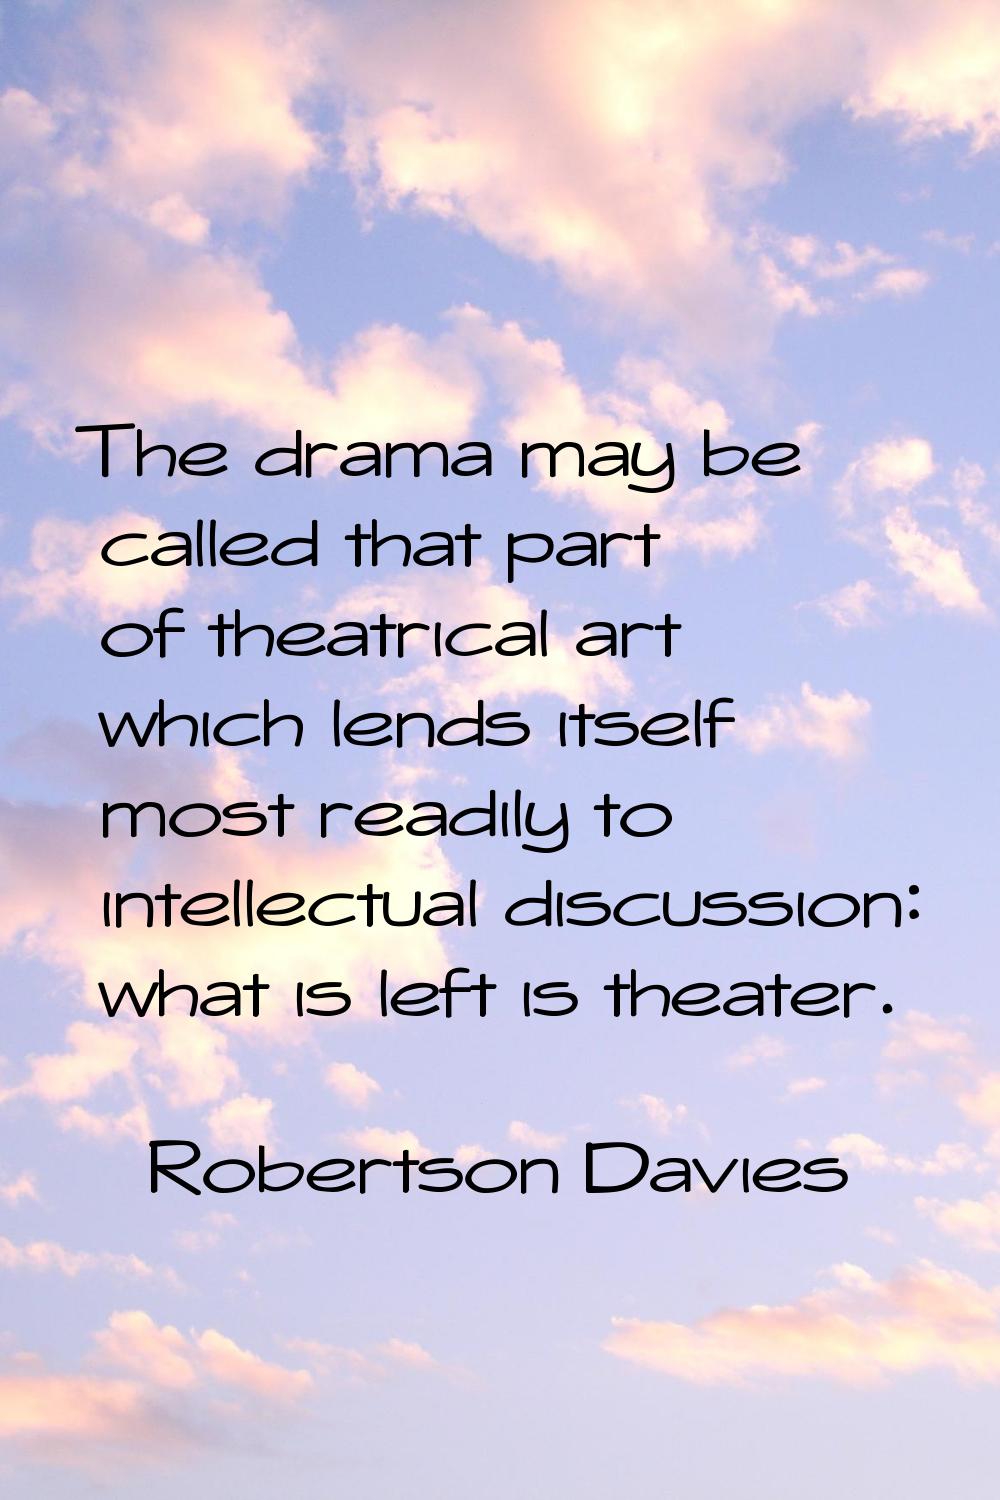 The drama may be called that part of theatrical art which lends itself most readily to intellectual